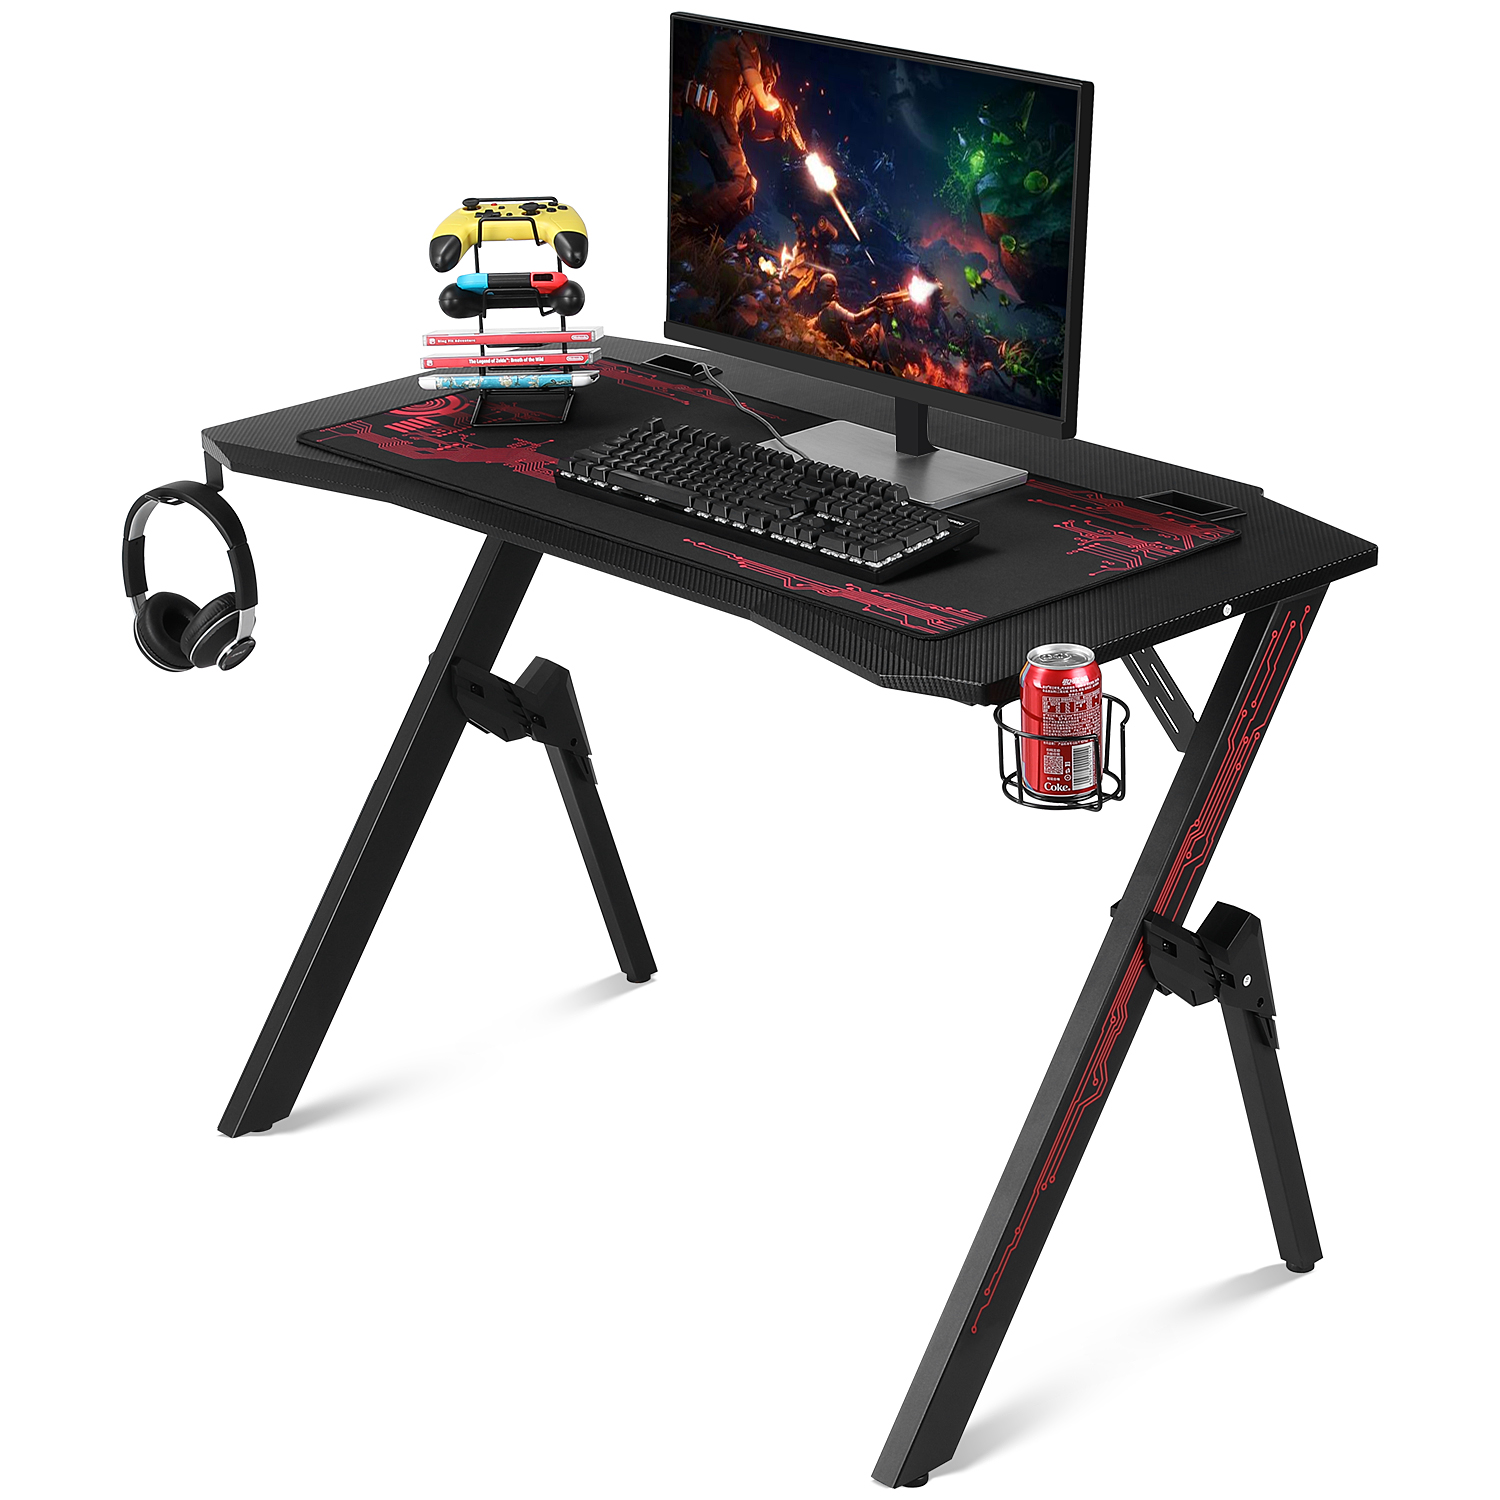 

Gaming Table Ergonomic Computer Desk K-Shaped Gamer Workstation Bedroom Furniture with Mouse Pad, Cup Holder, Controller Stand and Headphone